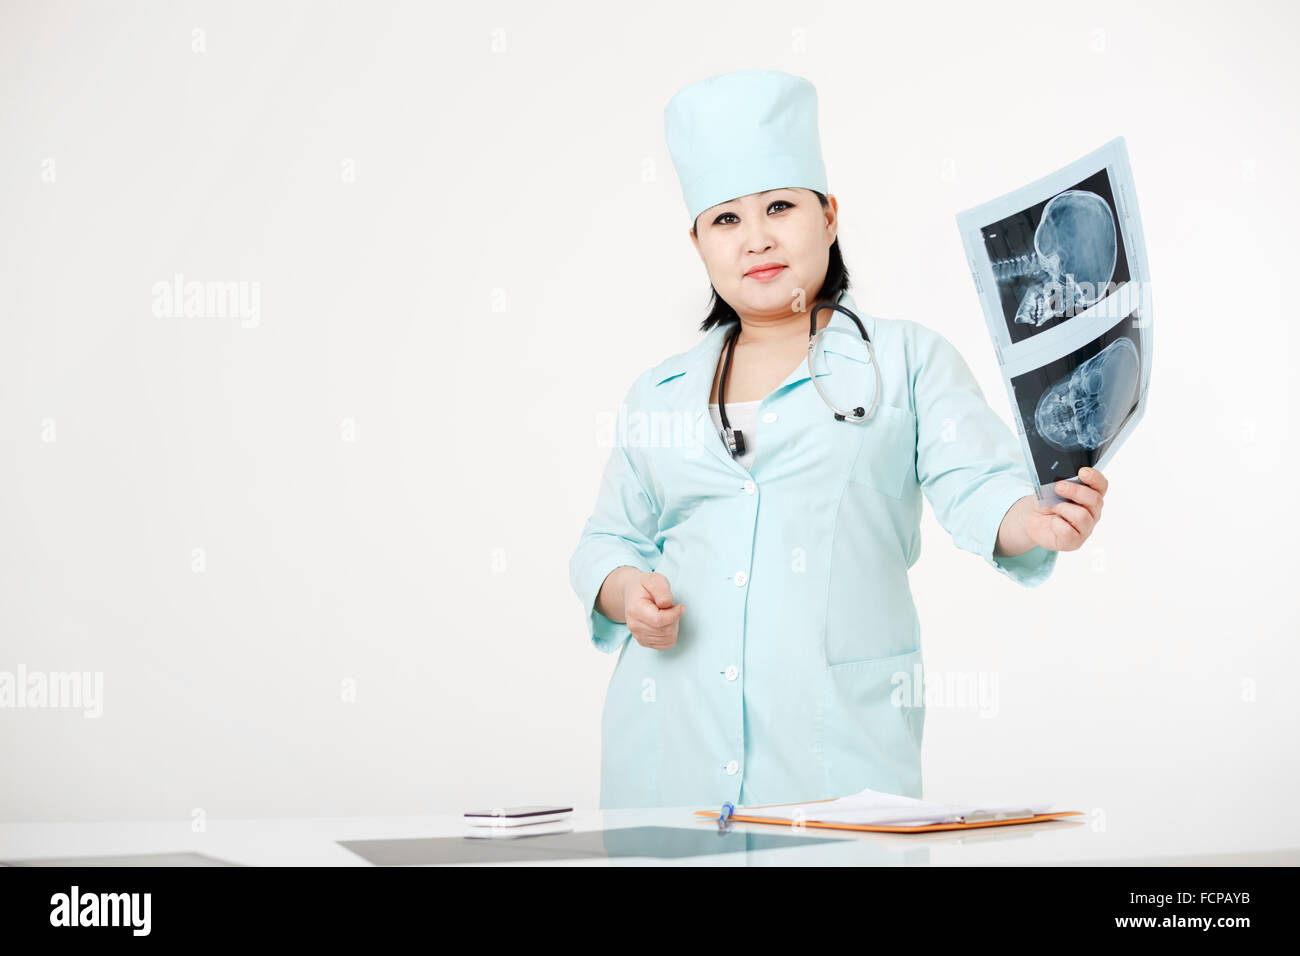 Curvy female doctor standing at table with X-ray examination results, image of skull in hand, wearing medical gown and cap, stethoscope. Asian, dark short hair. Radiology department. Stock Photo